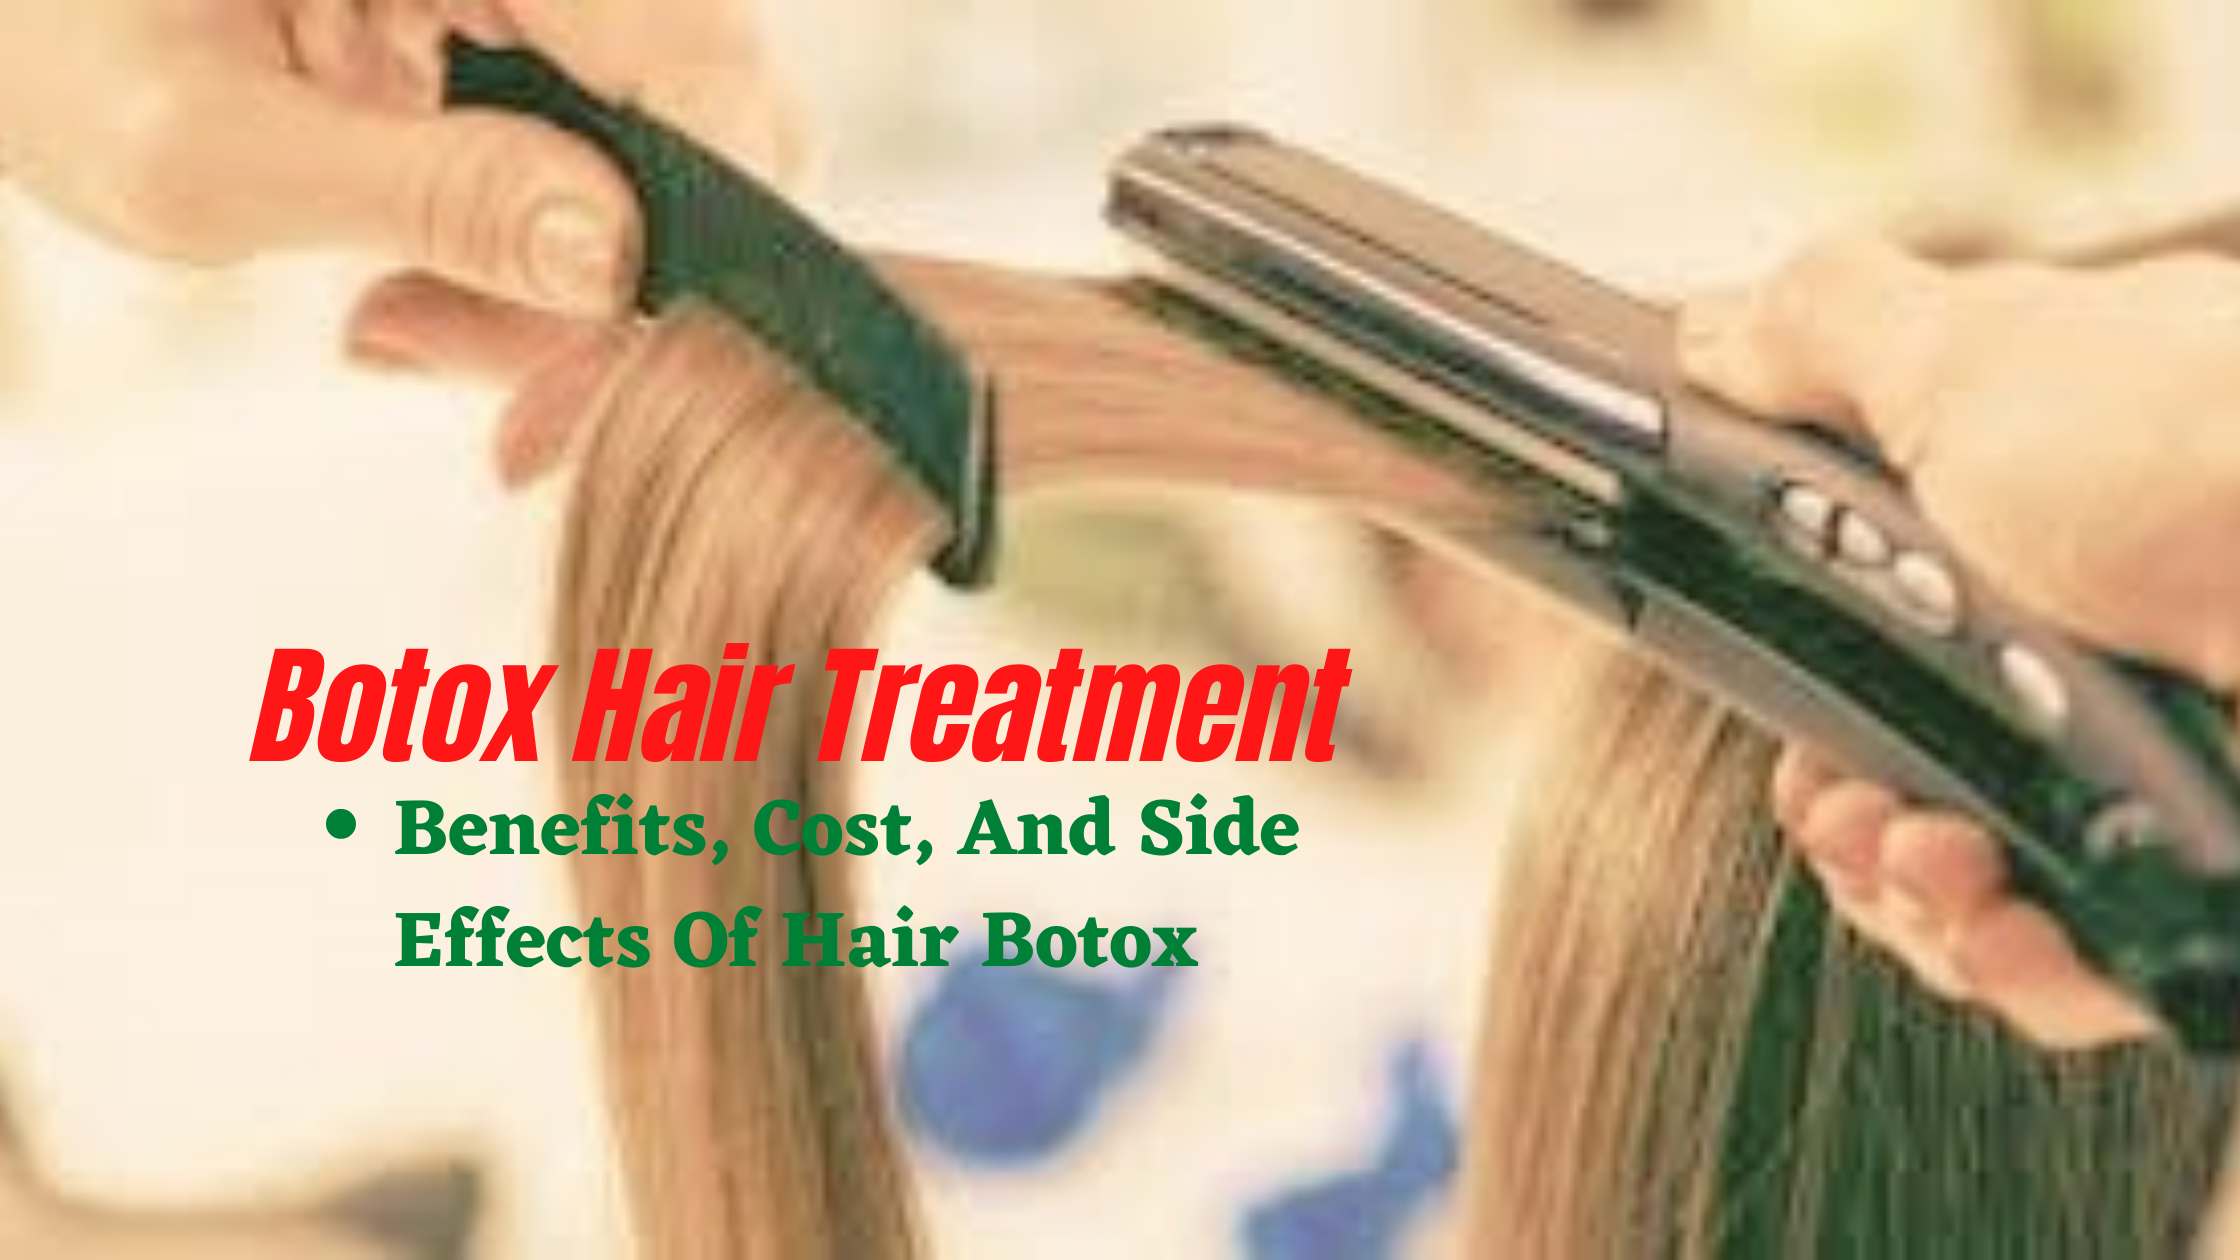 How to use botox hair treatment